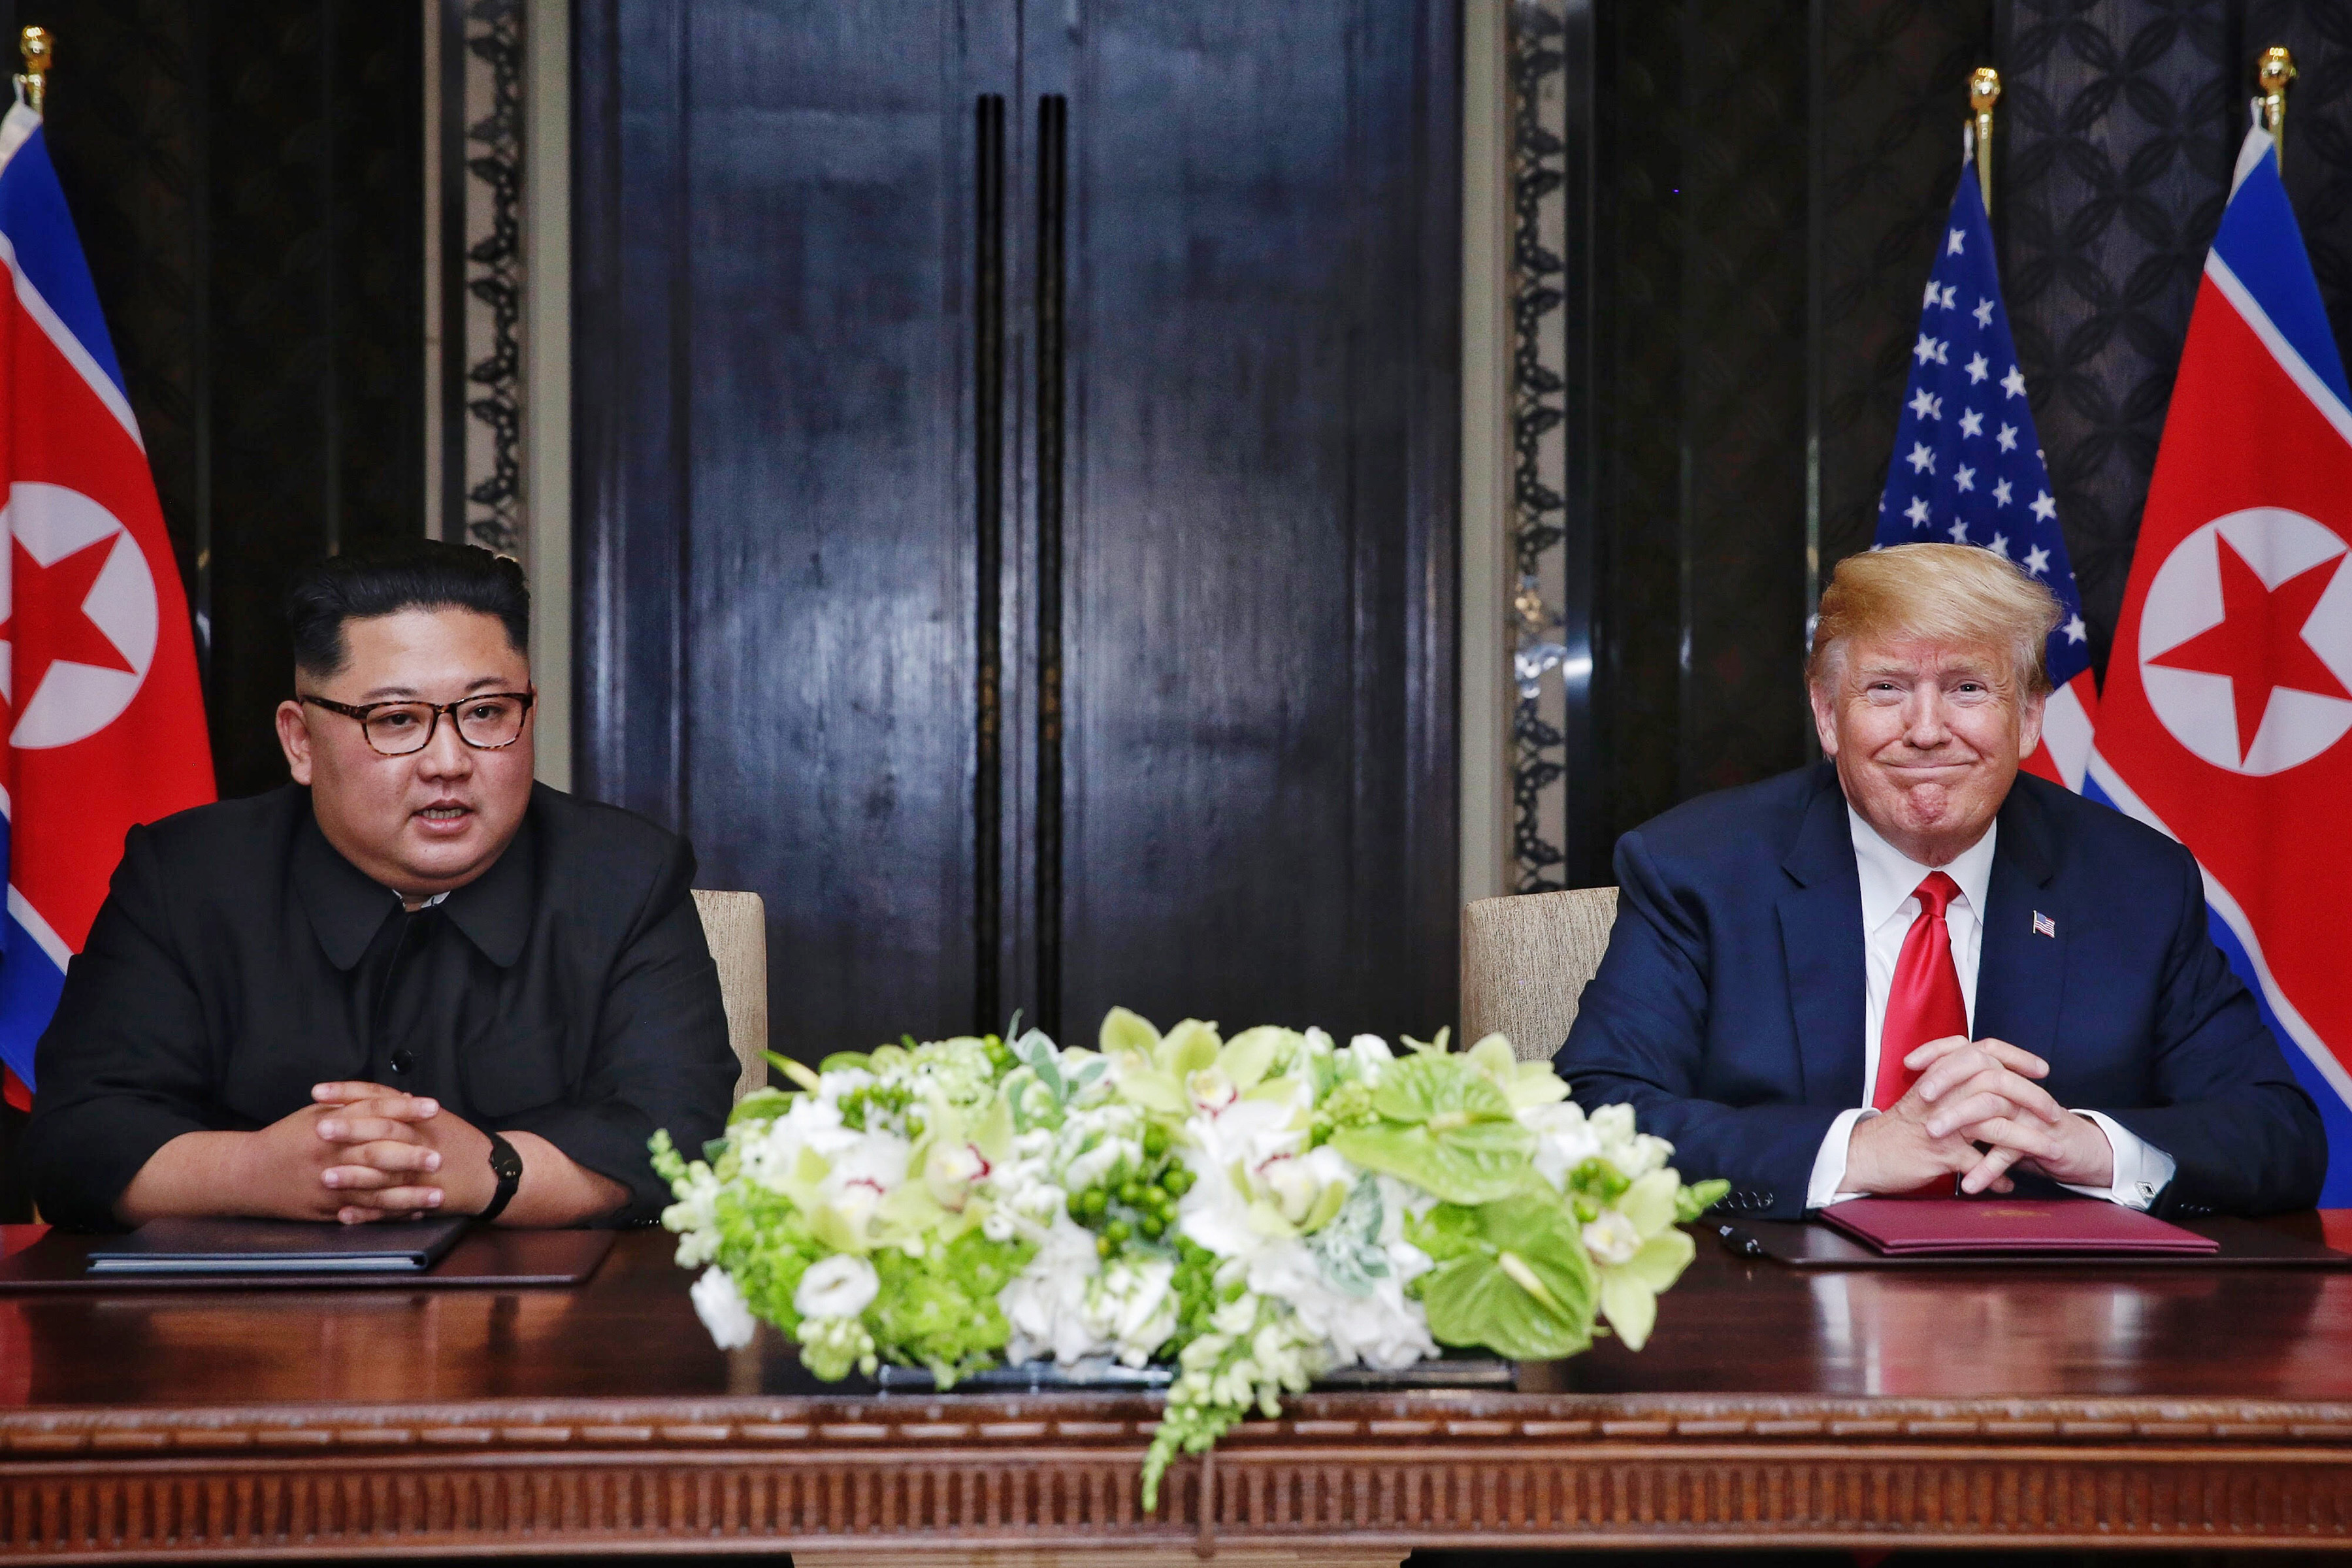 North Korean leader Kim Jong-un, left, with U.S. President Donald Trump during their historic summit in Singapore on June 12. (Kevin Lim/The Straits Times/Handout/Getty Images)